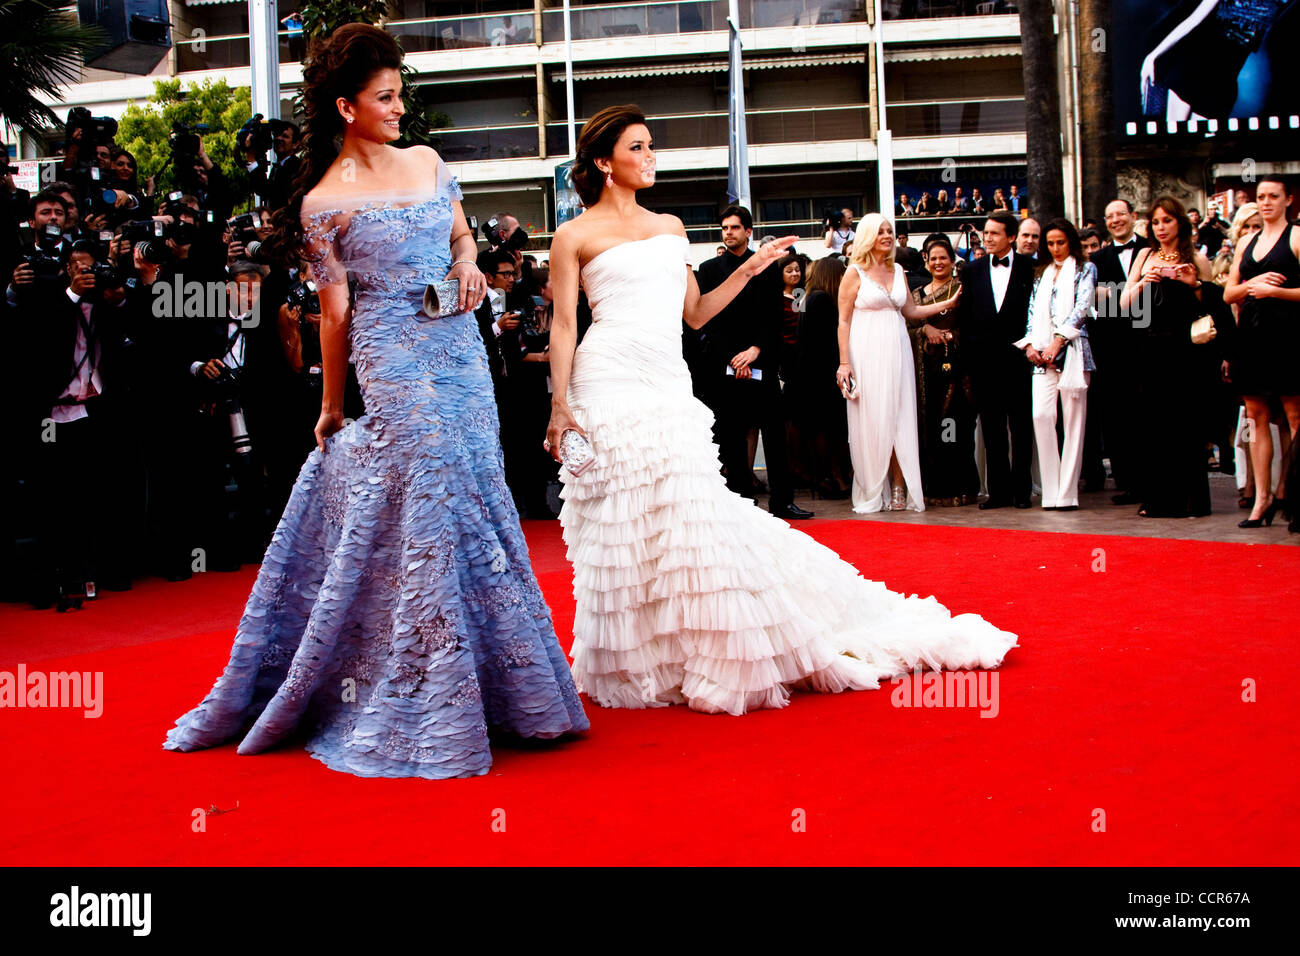 The opening ceremony of the Cannes Film Festival, May 12, 2010.Pictured: Indian model Aishwarya Rai and US model and actress Eva Longoria (R) Stock Photo